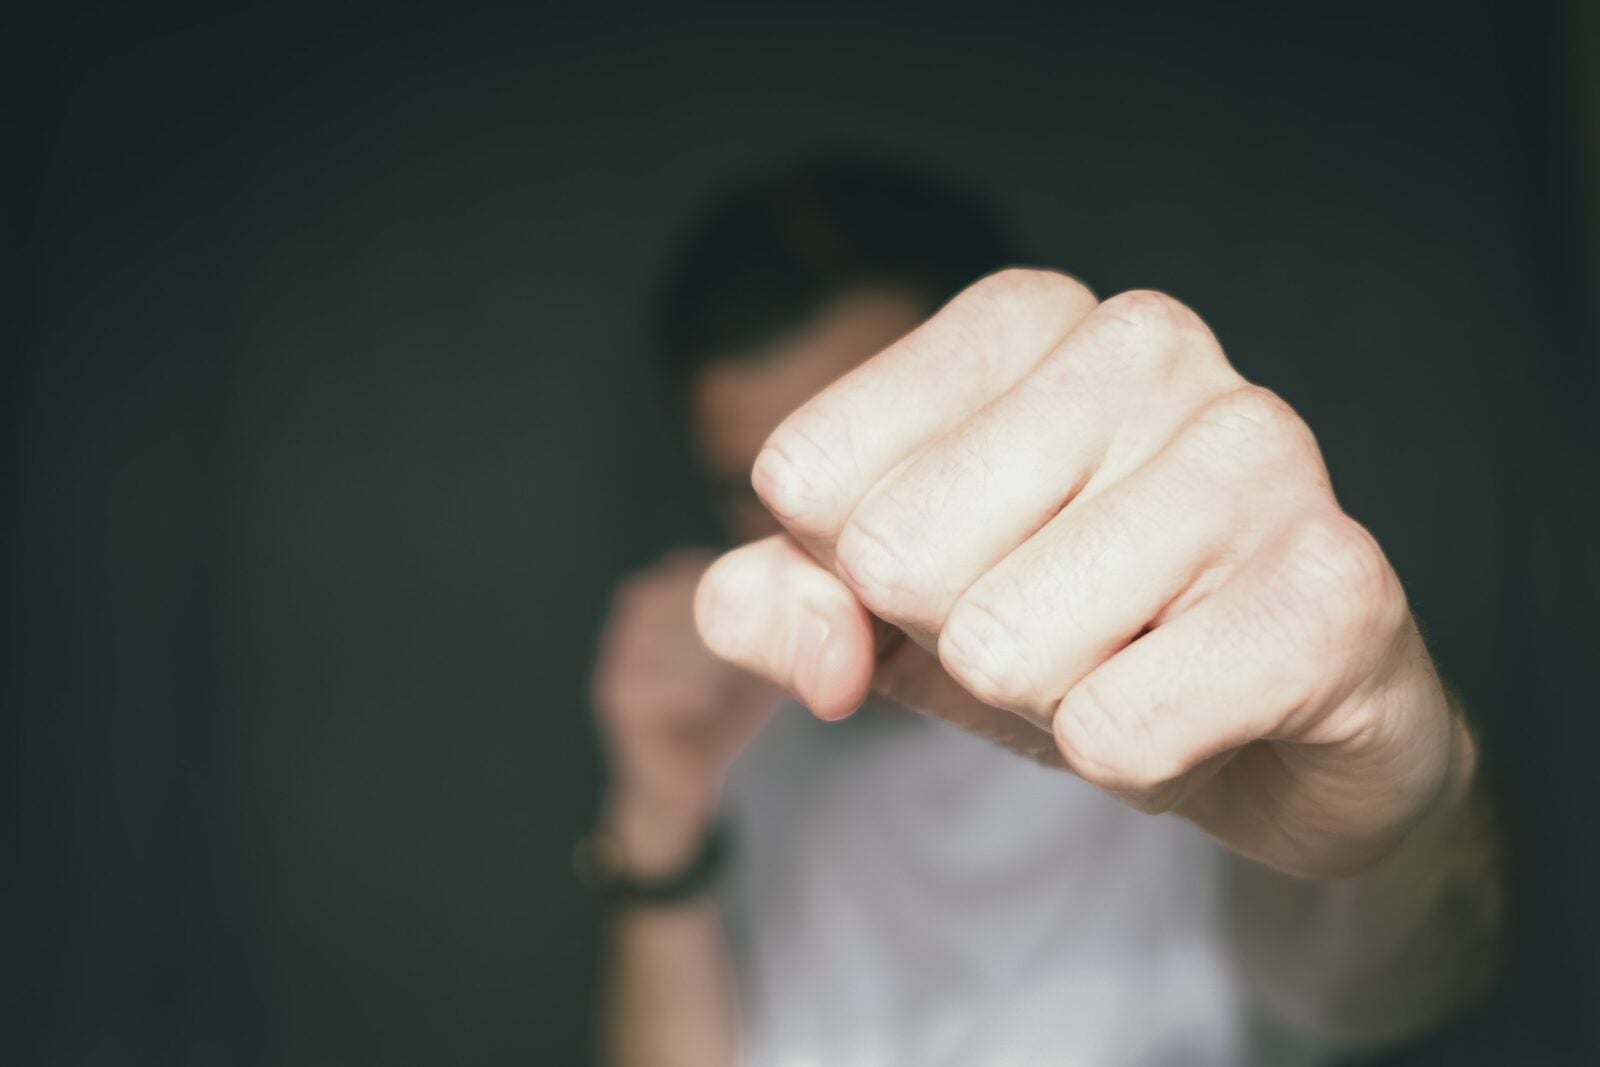 Image shows a man with his fist outstretched towards the camera. Only his fists are focused while the man and his background are blurred.